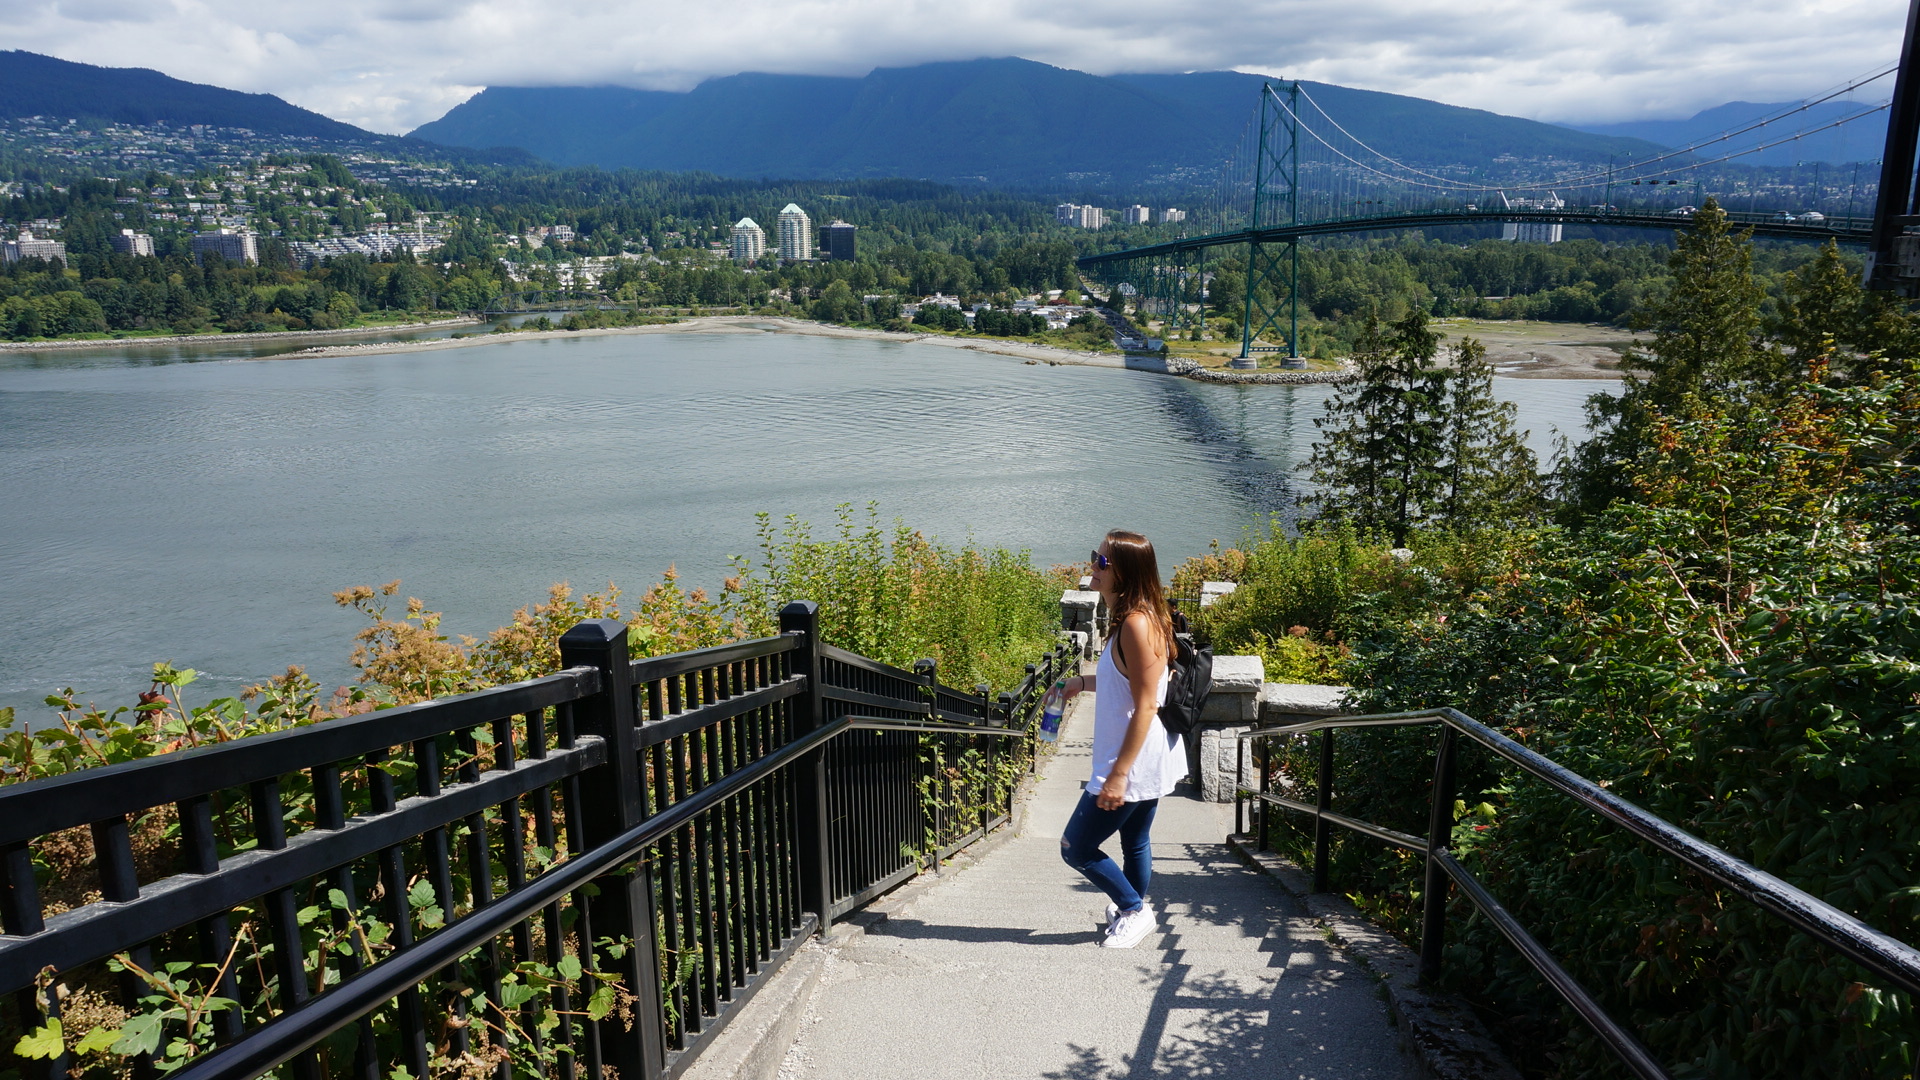 Vancouver is a picture perfect city with mountain views from every inch of town and is a great starting point for your Canadian road trip.